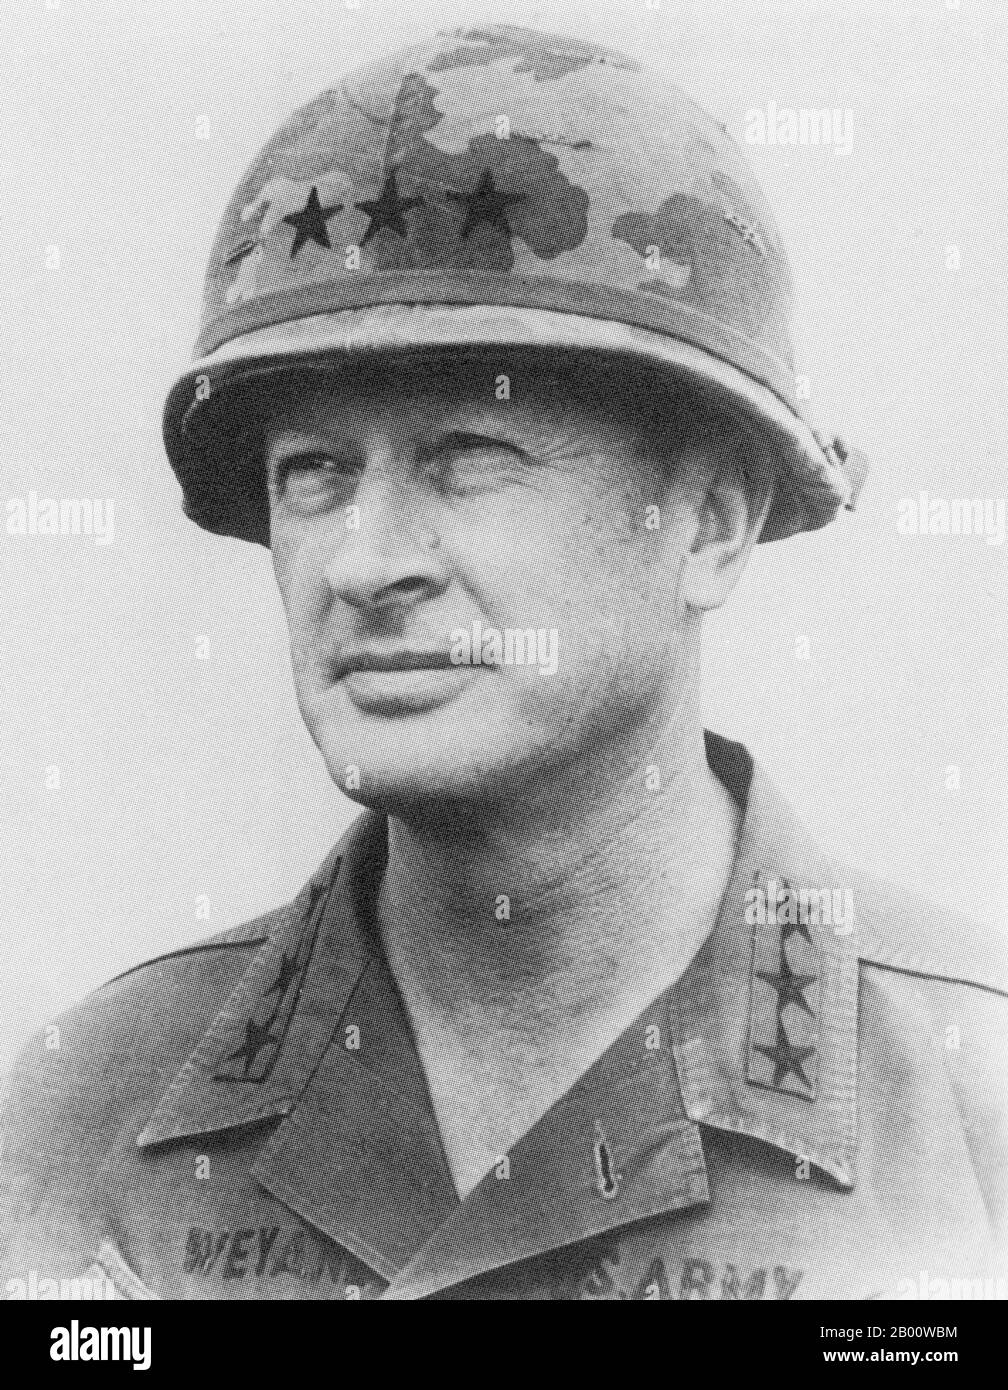 USA/Vietnam: Lieutenant General Frederick Weyand, commander of II Field Force, Vietnam.  Frederick Carlton Weyand (September 15, 1916 - February 10, 2010) was a U.S. Army General. Weyand was the last commander of American military operations in the Vietnam War from 1972–1973, and served as the 28th US Army Chief of Staff from 1974-1976. Stock Photo